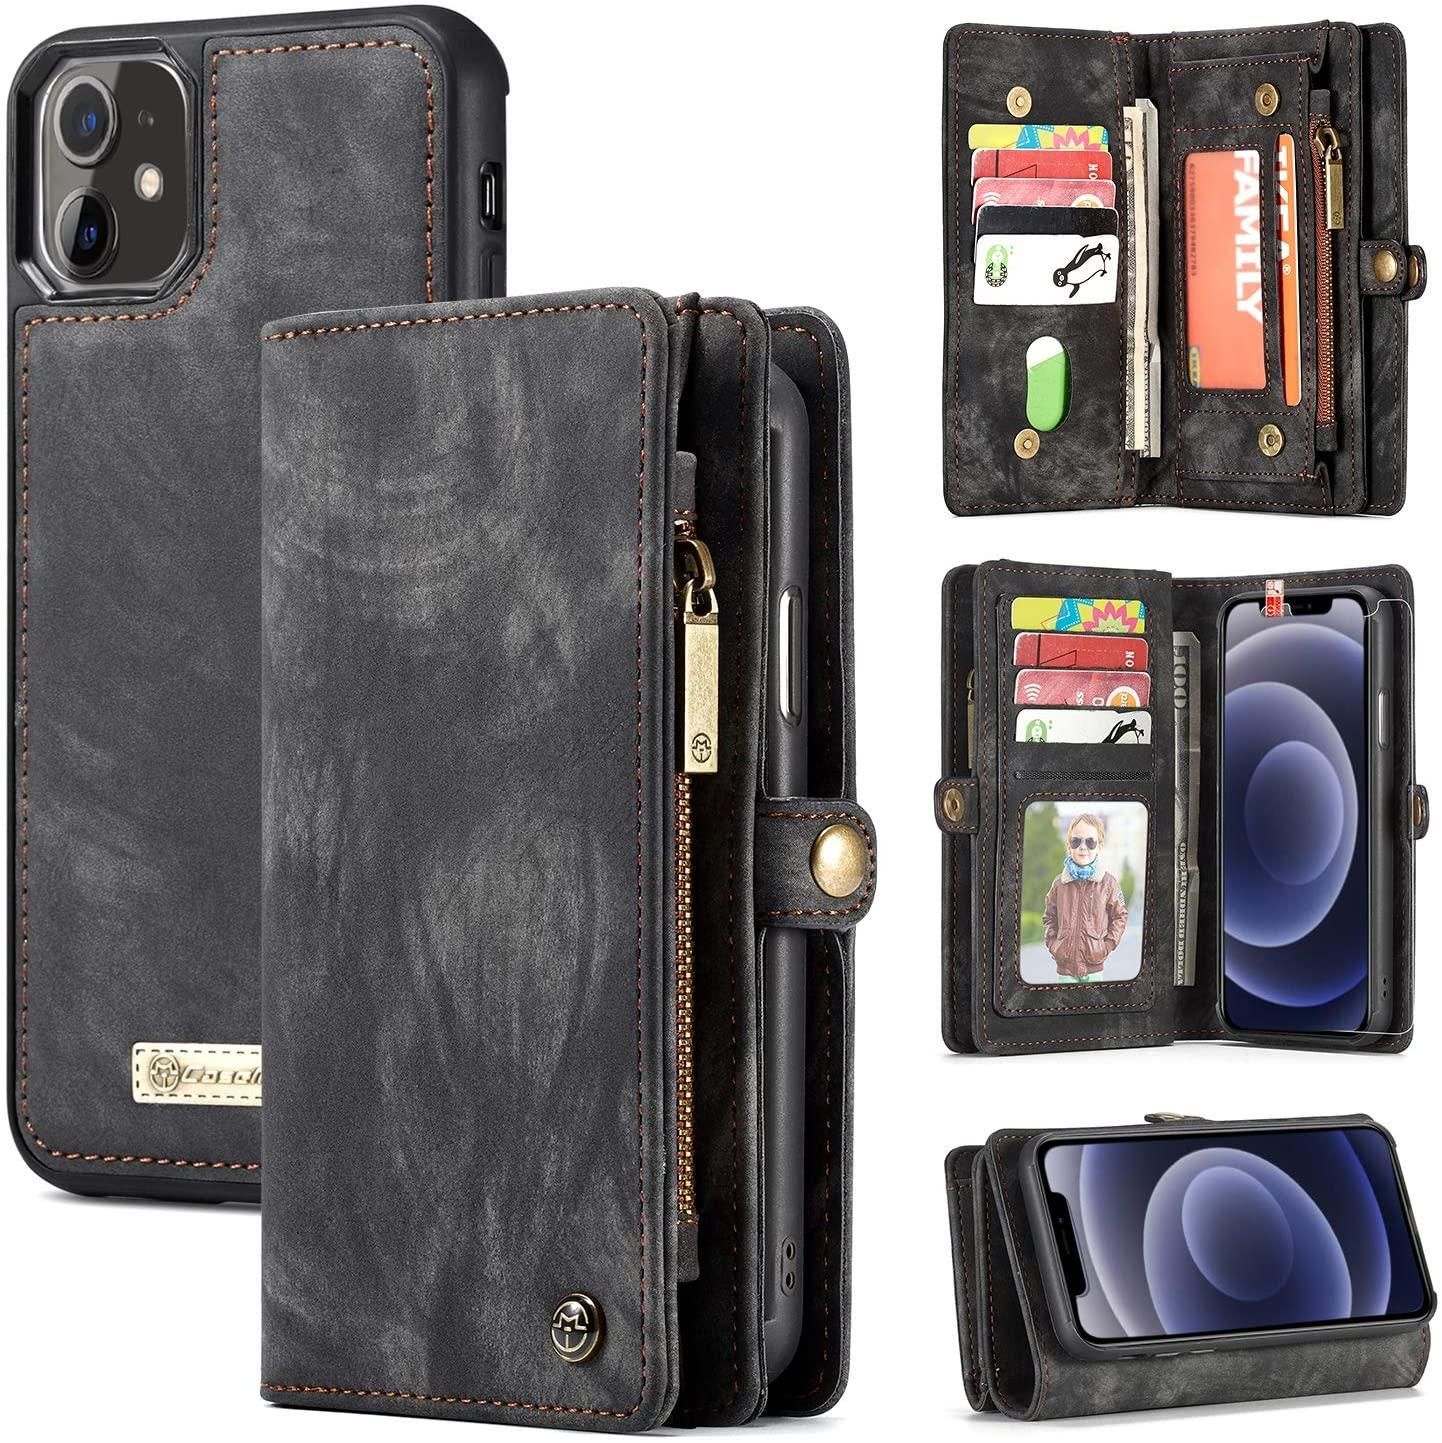 These are the best wallet cases for your iPhone 12 Pro